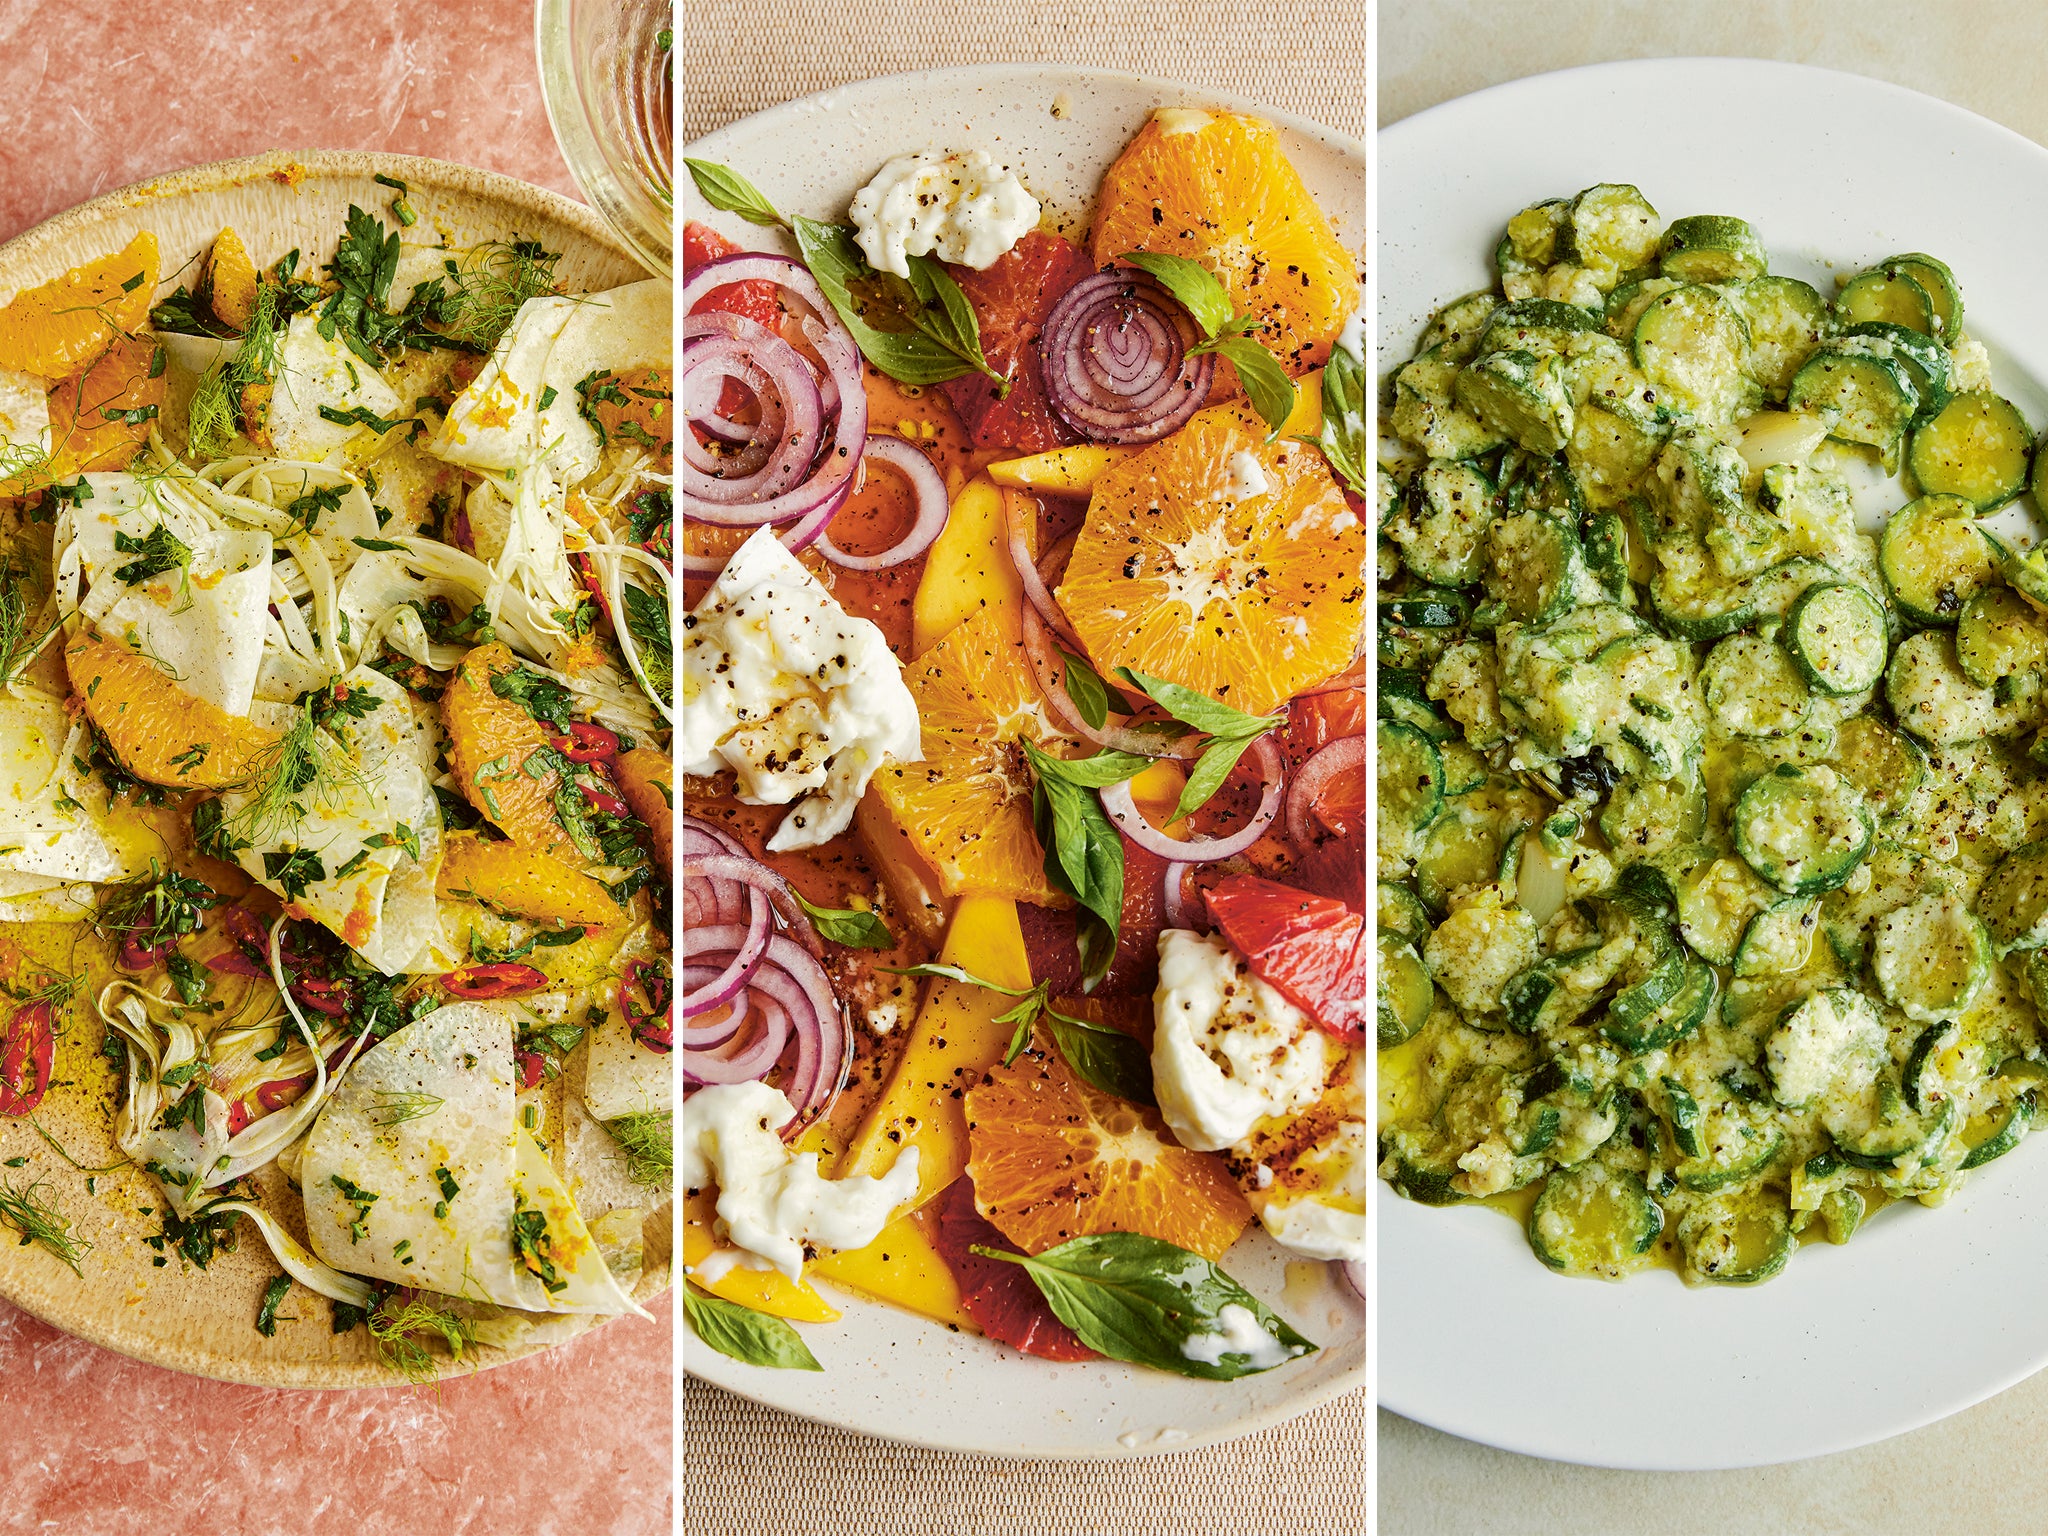 These recipes show the full potential of salads as delicious, satisfying meals